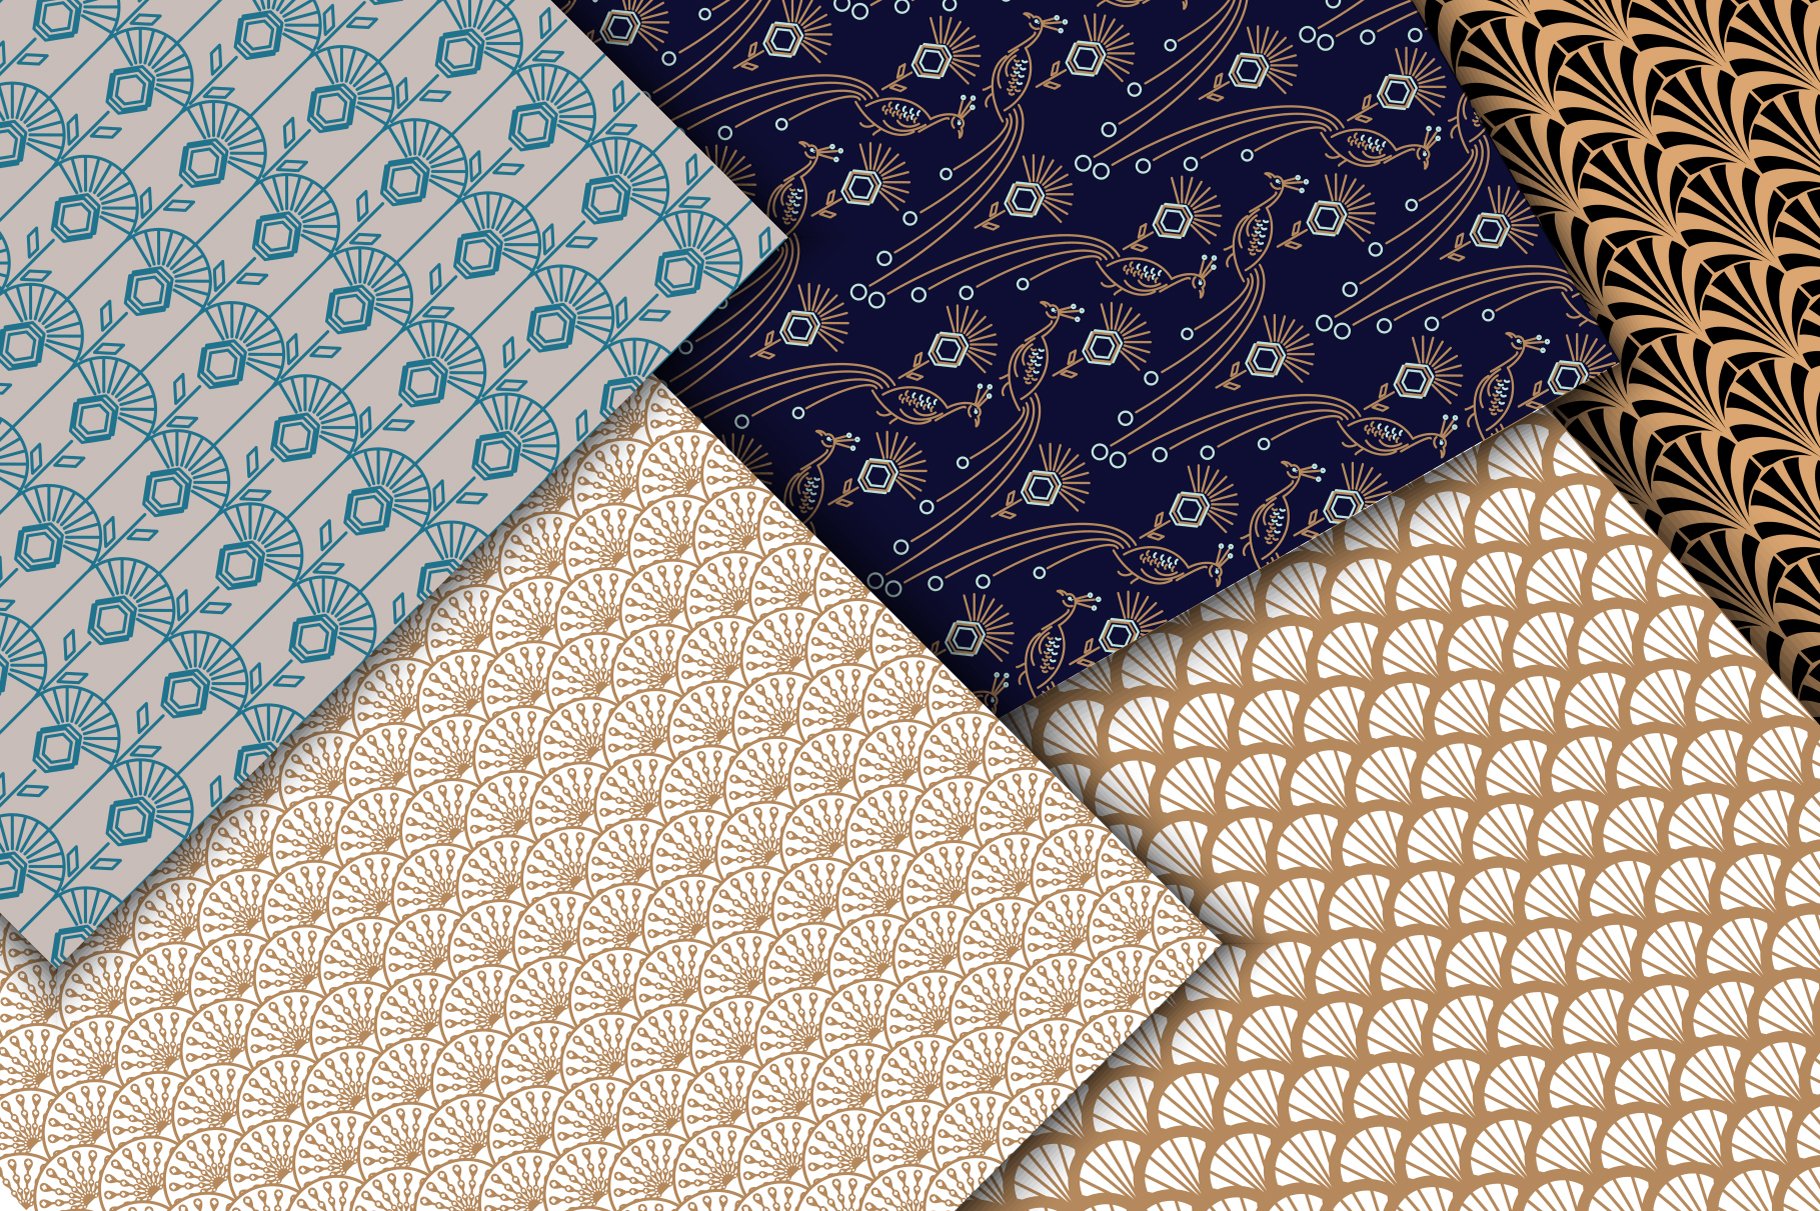 The Versatile Textures and Patterns Collection